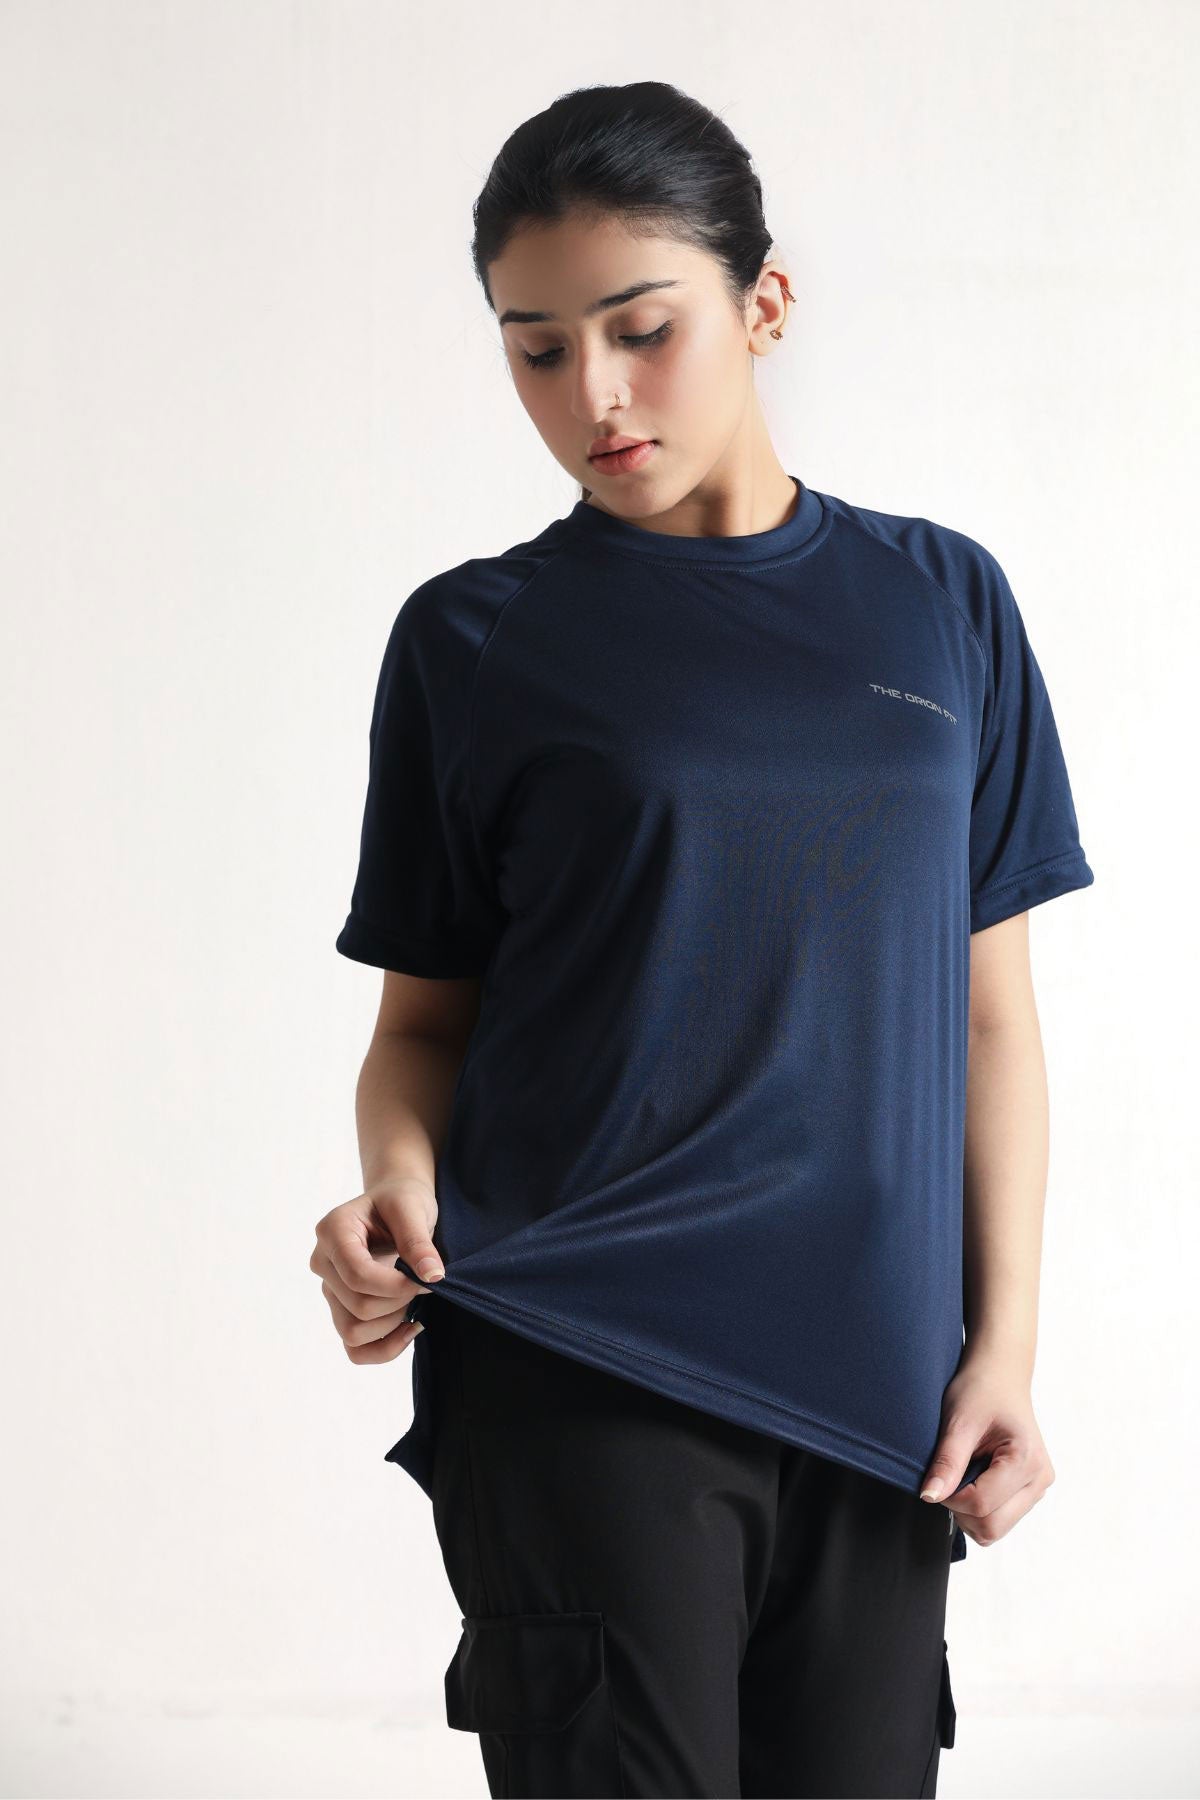 AMPLIFY DRI FIT SUPER NAVY BLUE TEE - The Orion Fit